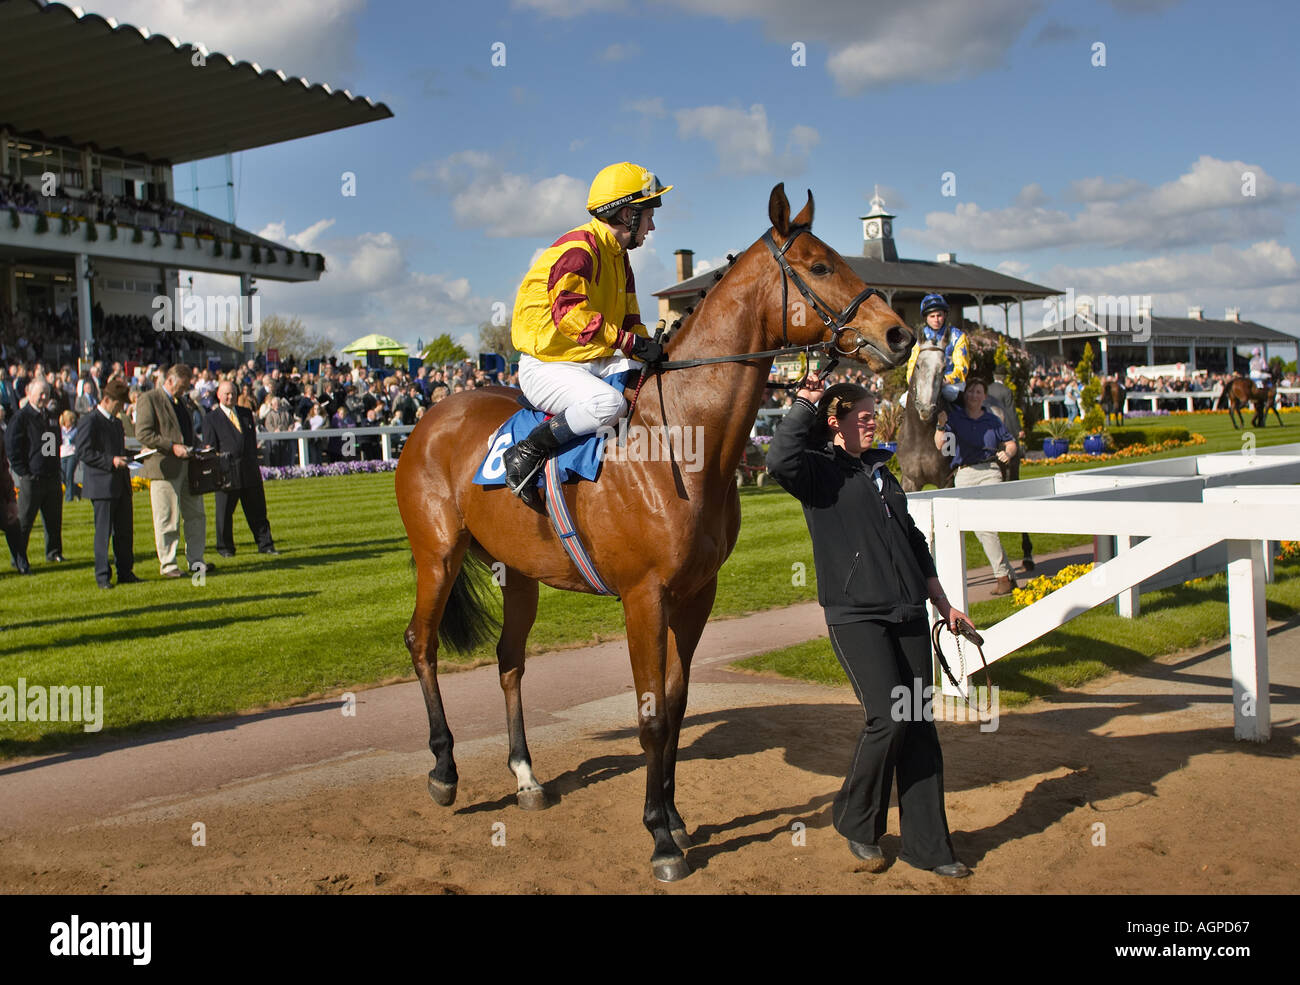 Racehorse being led around the Parade ring at Doncaster Racecourse Yorkshire England UK Stock Photo